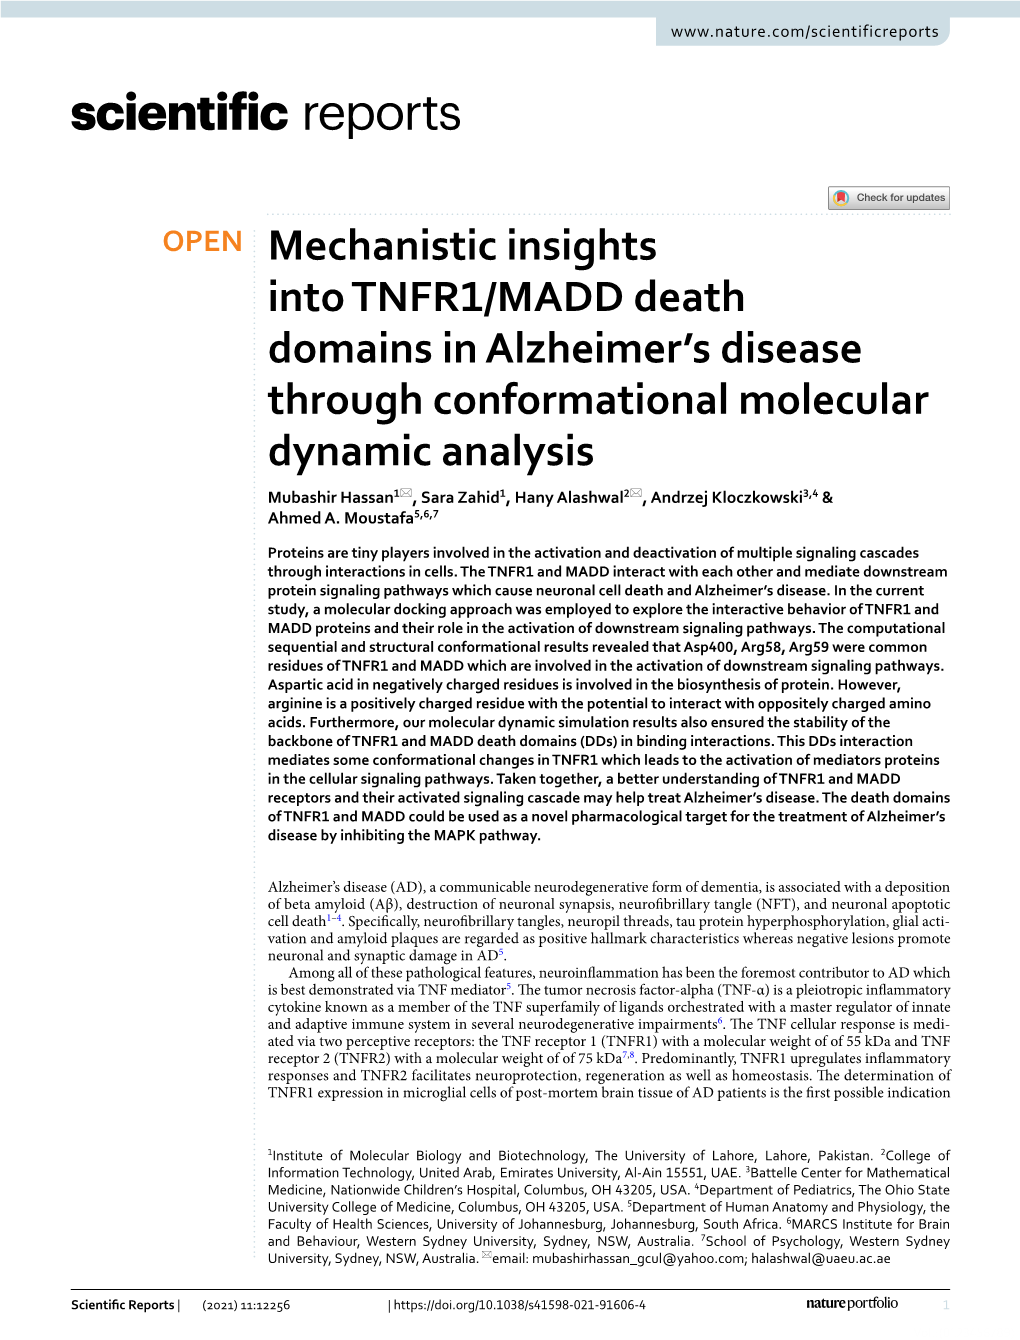 Mechanistic Insights Into TNFR1/MADD Death Domains In